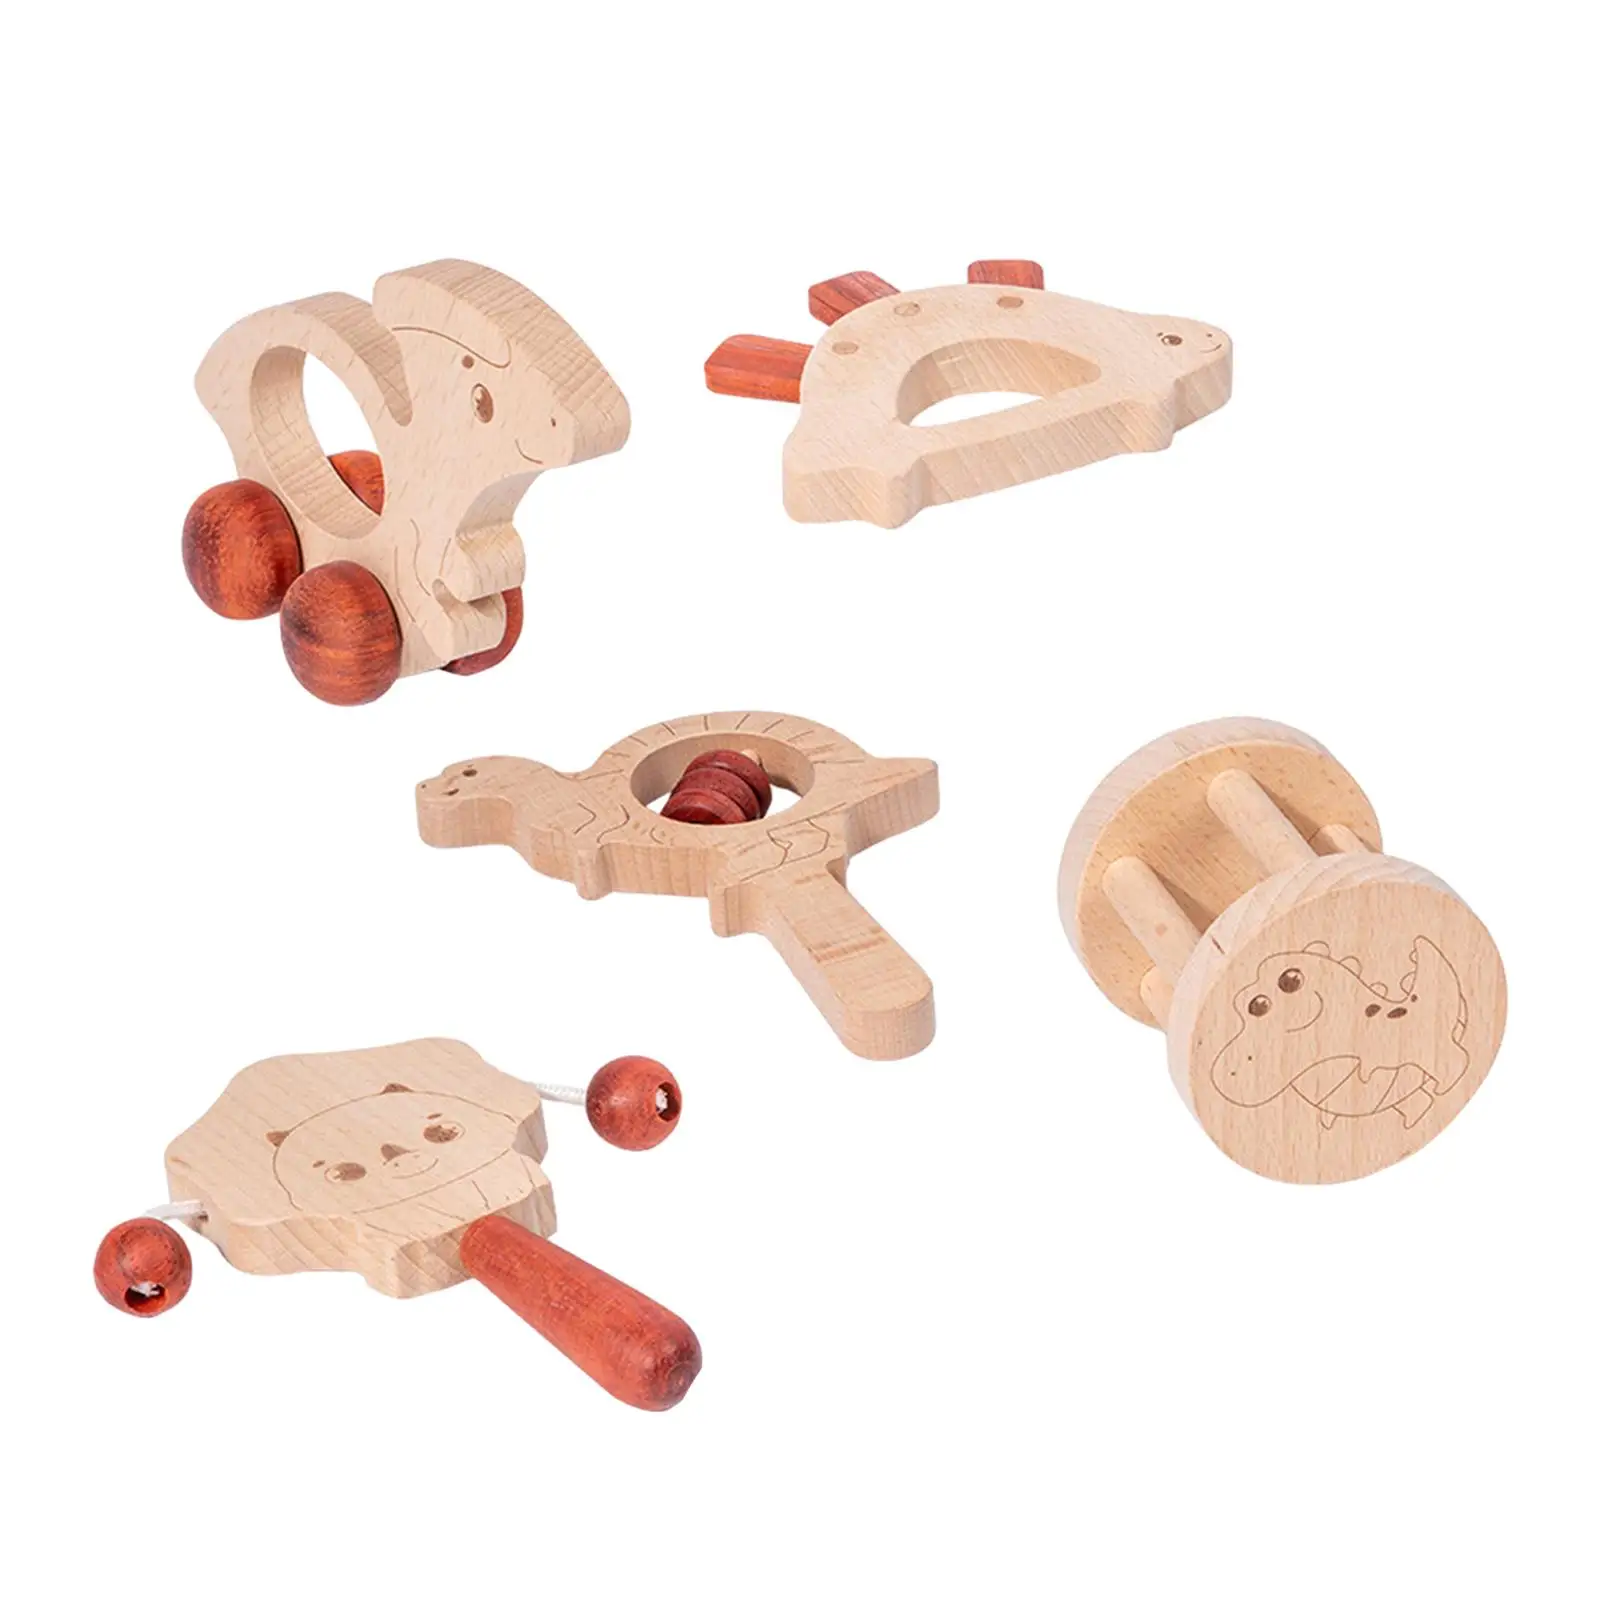 

5x Wooden Baby Toys Handmade Newborn Toy Sensory Development Car Baby Rattle with Bells for Girls Babies Boys Infant 6-12 Months